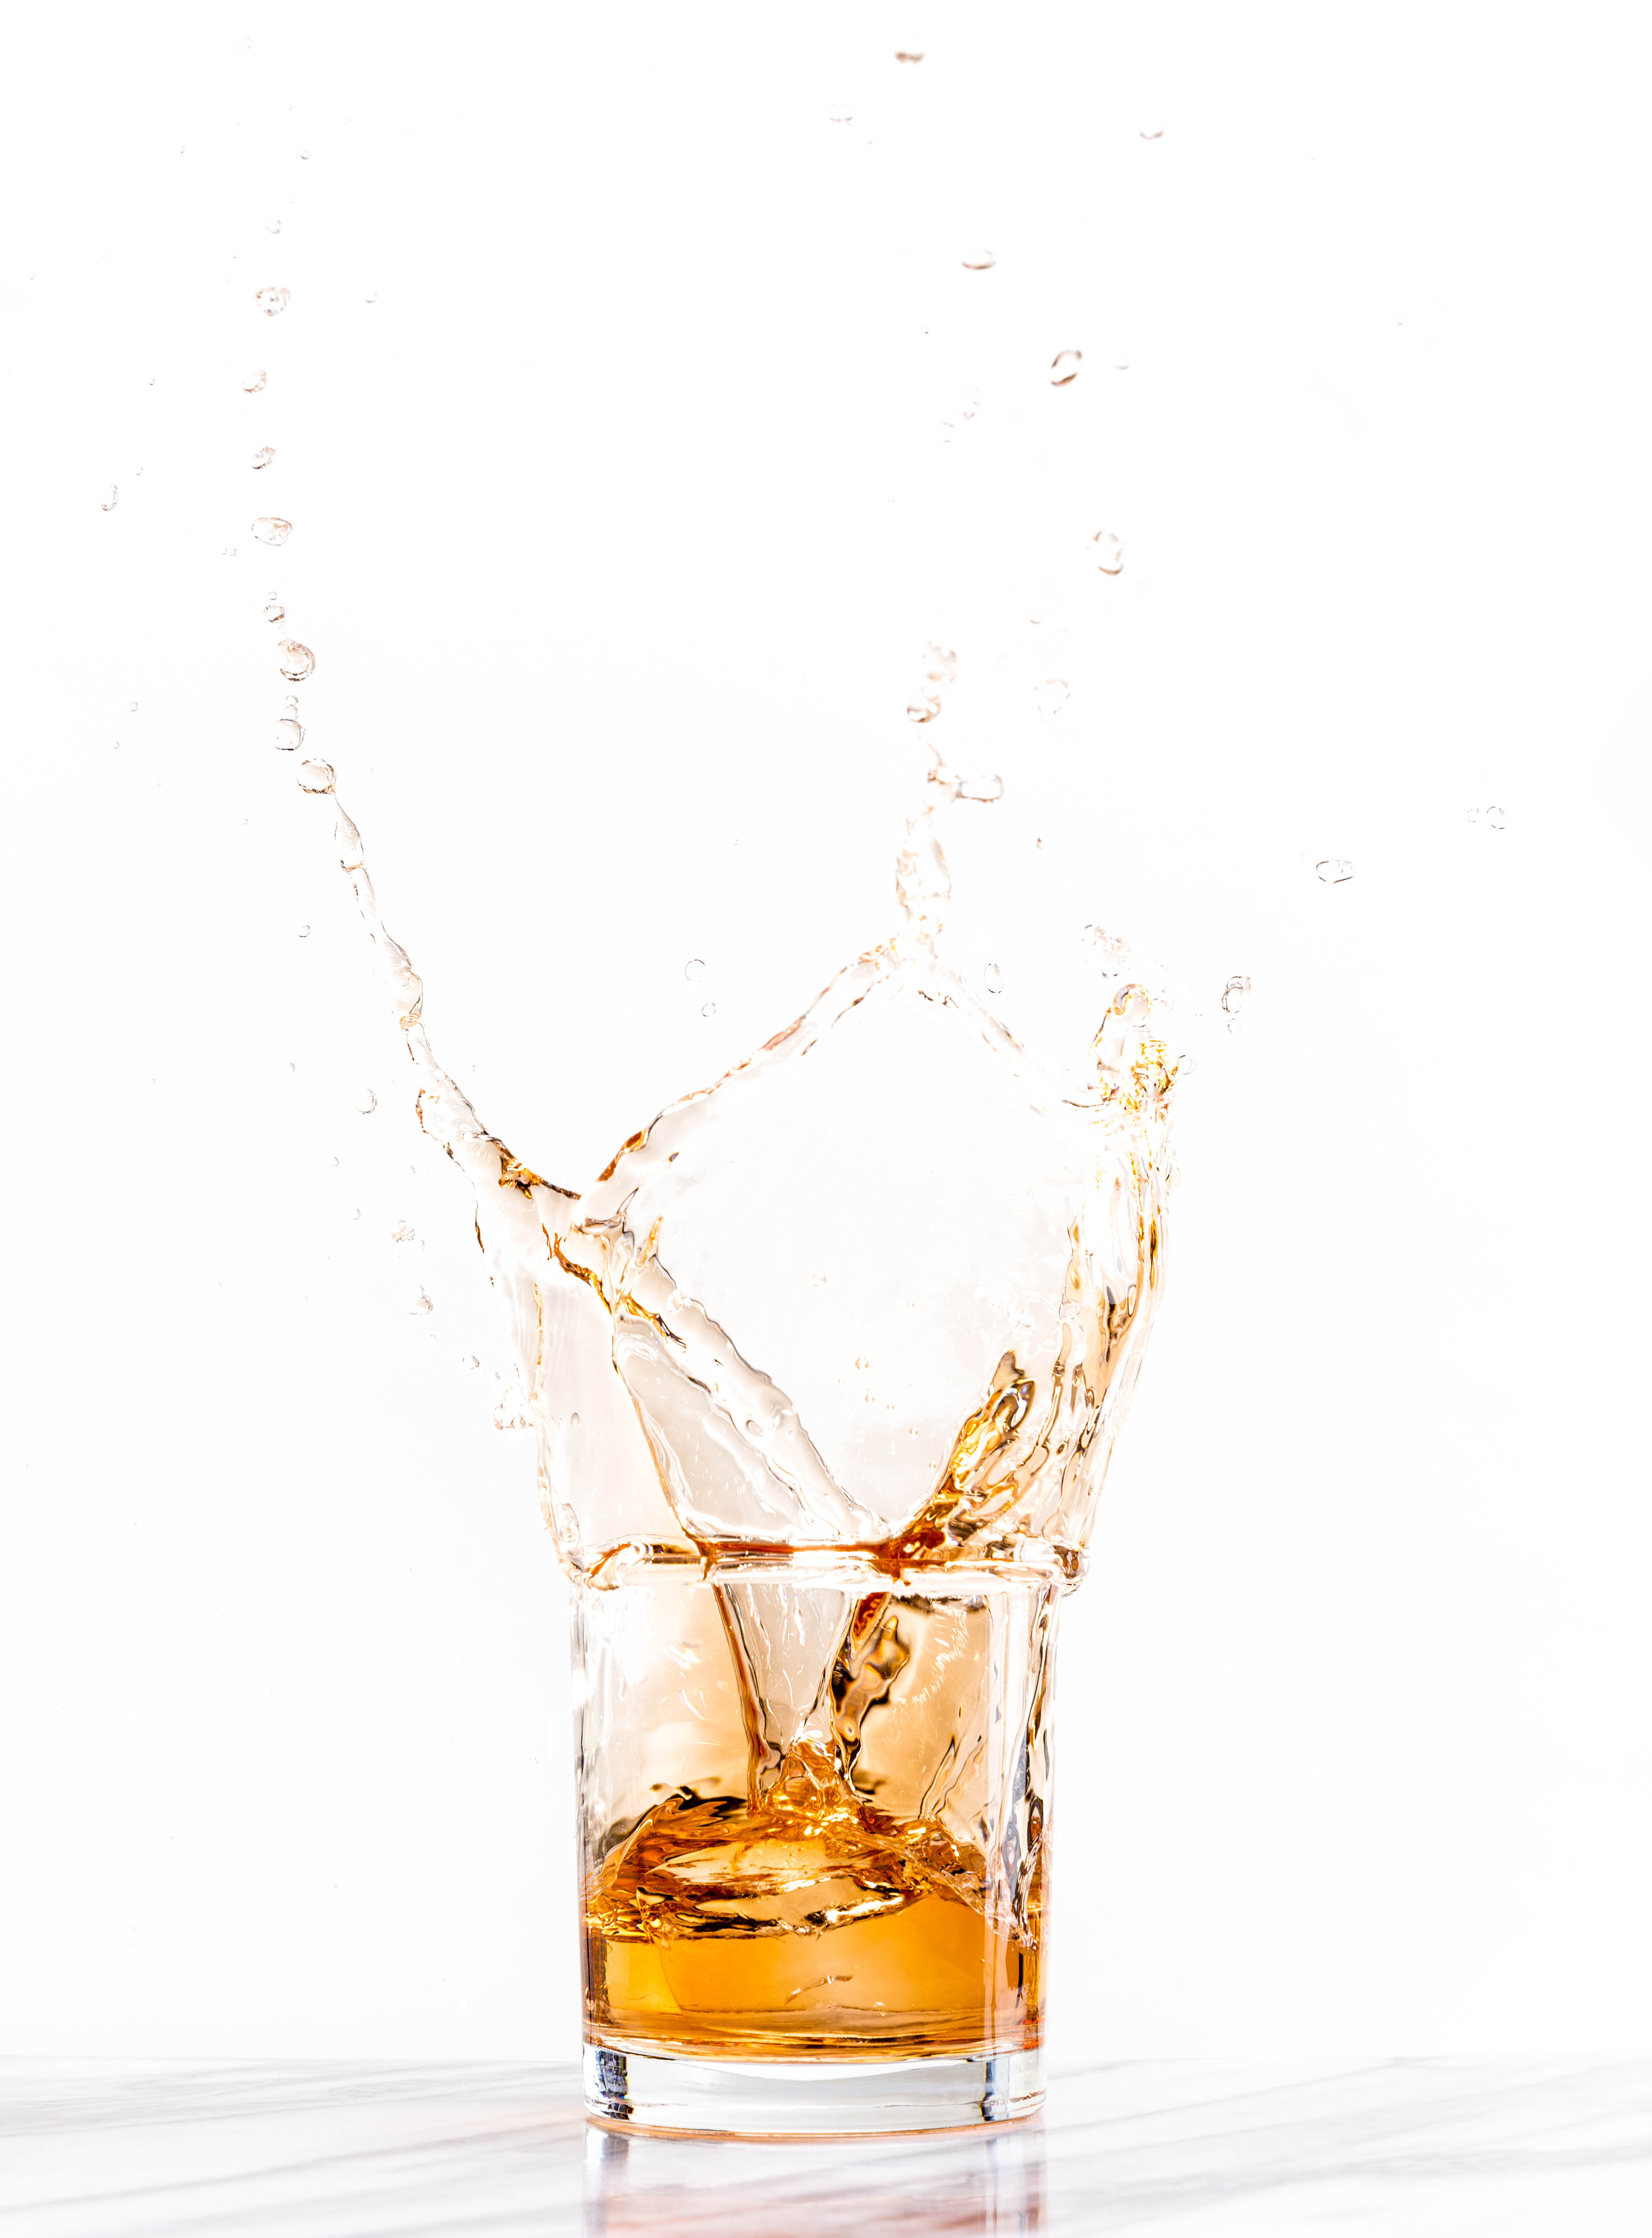 Ice cube dropped into glass of liquor